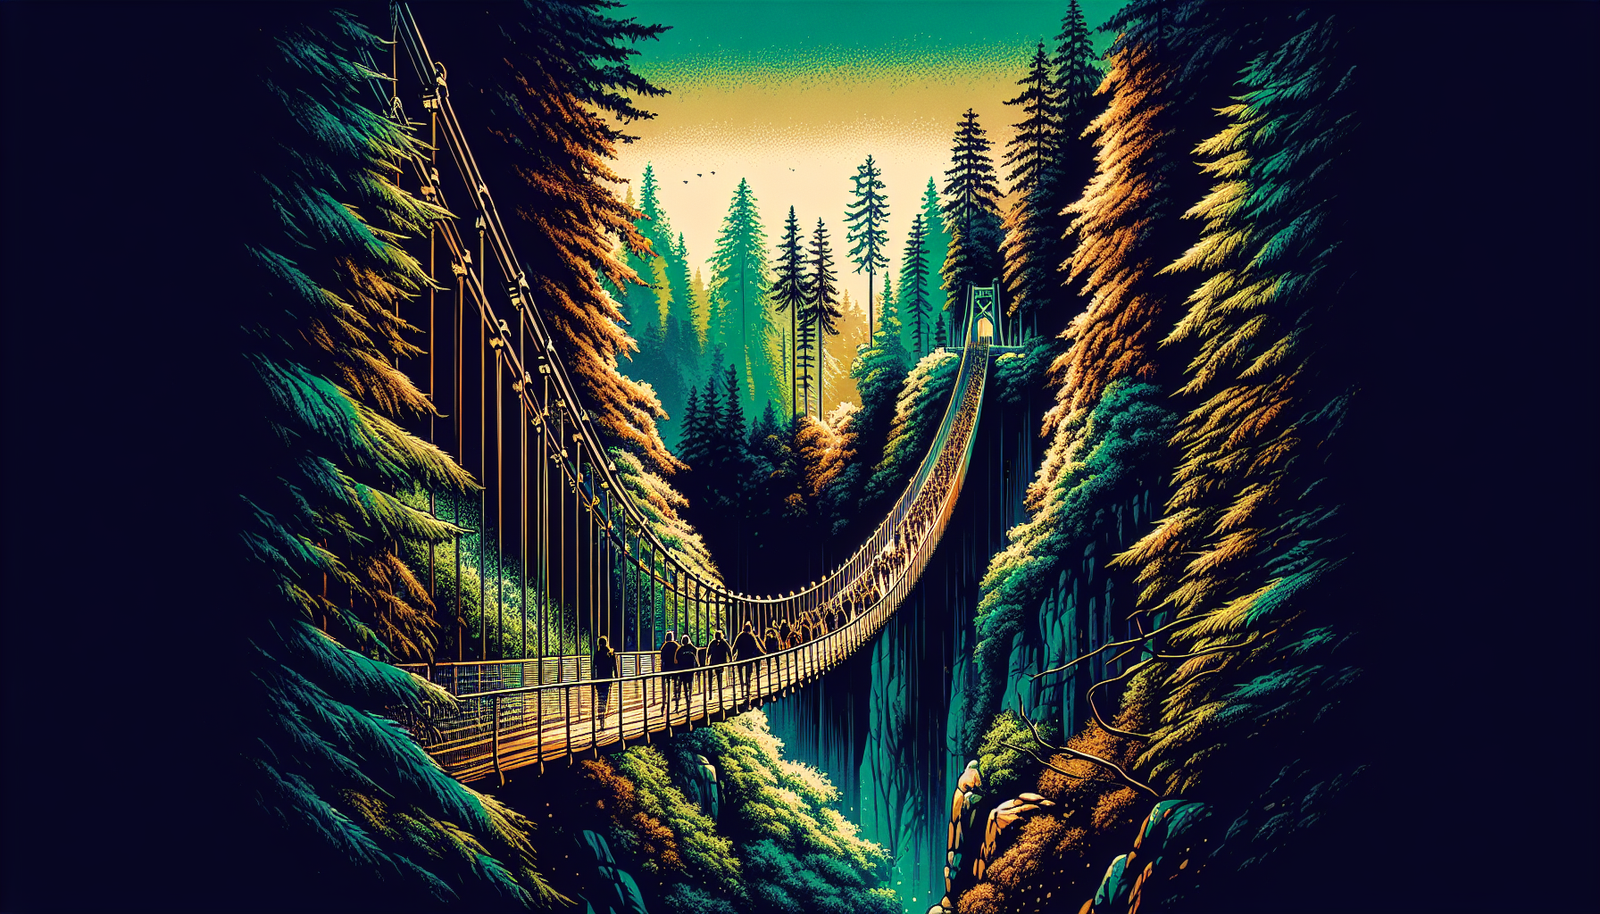 Illustration of visitors crossing the Capilano Suspension Bridge surrounded by lush forest